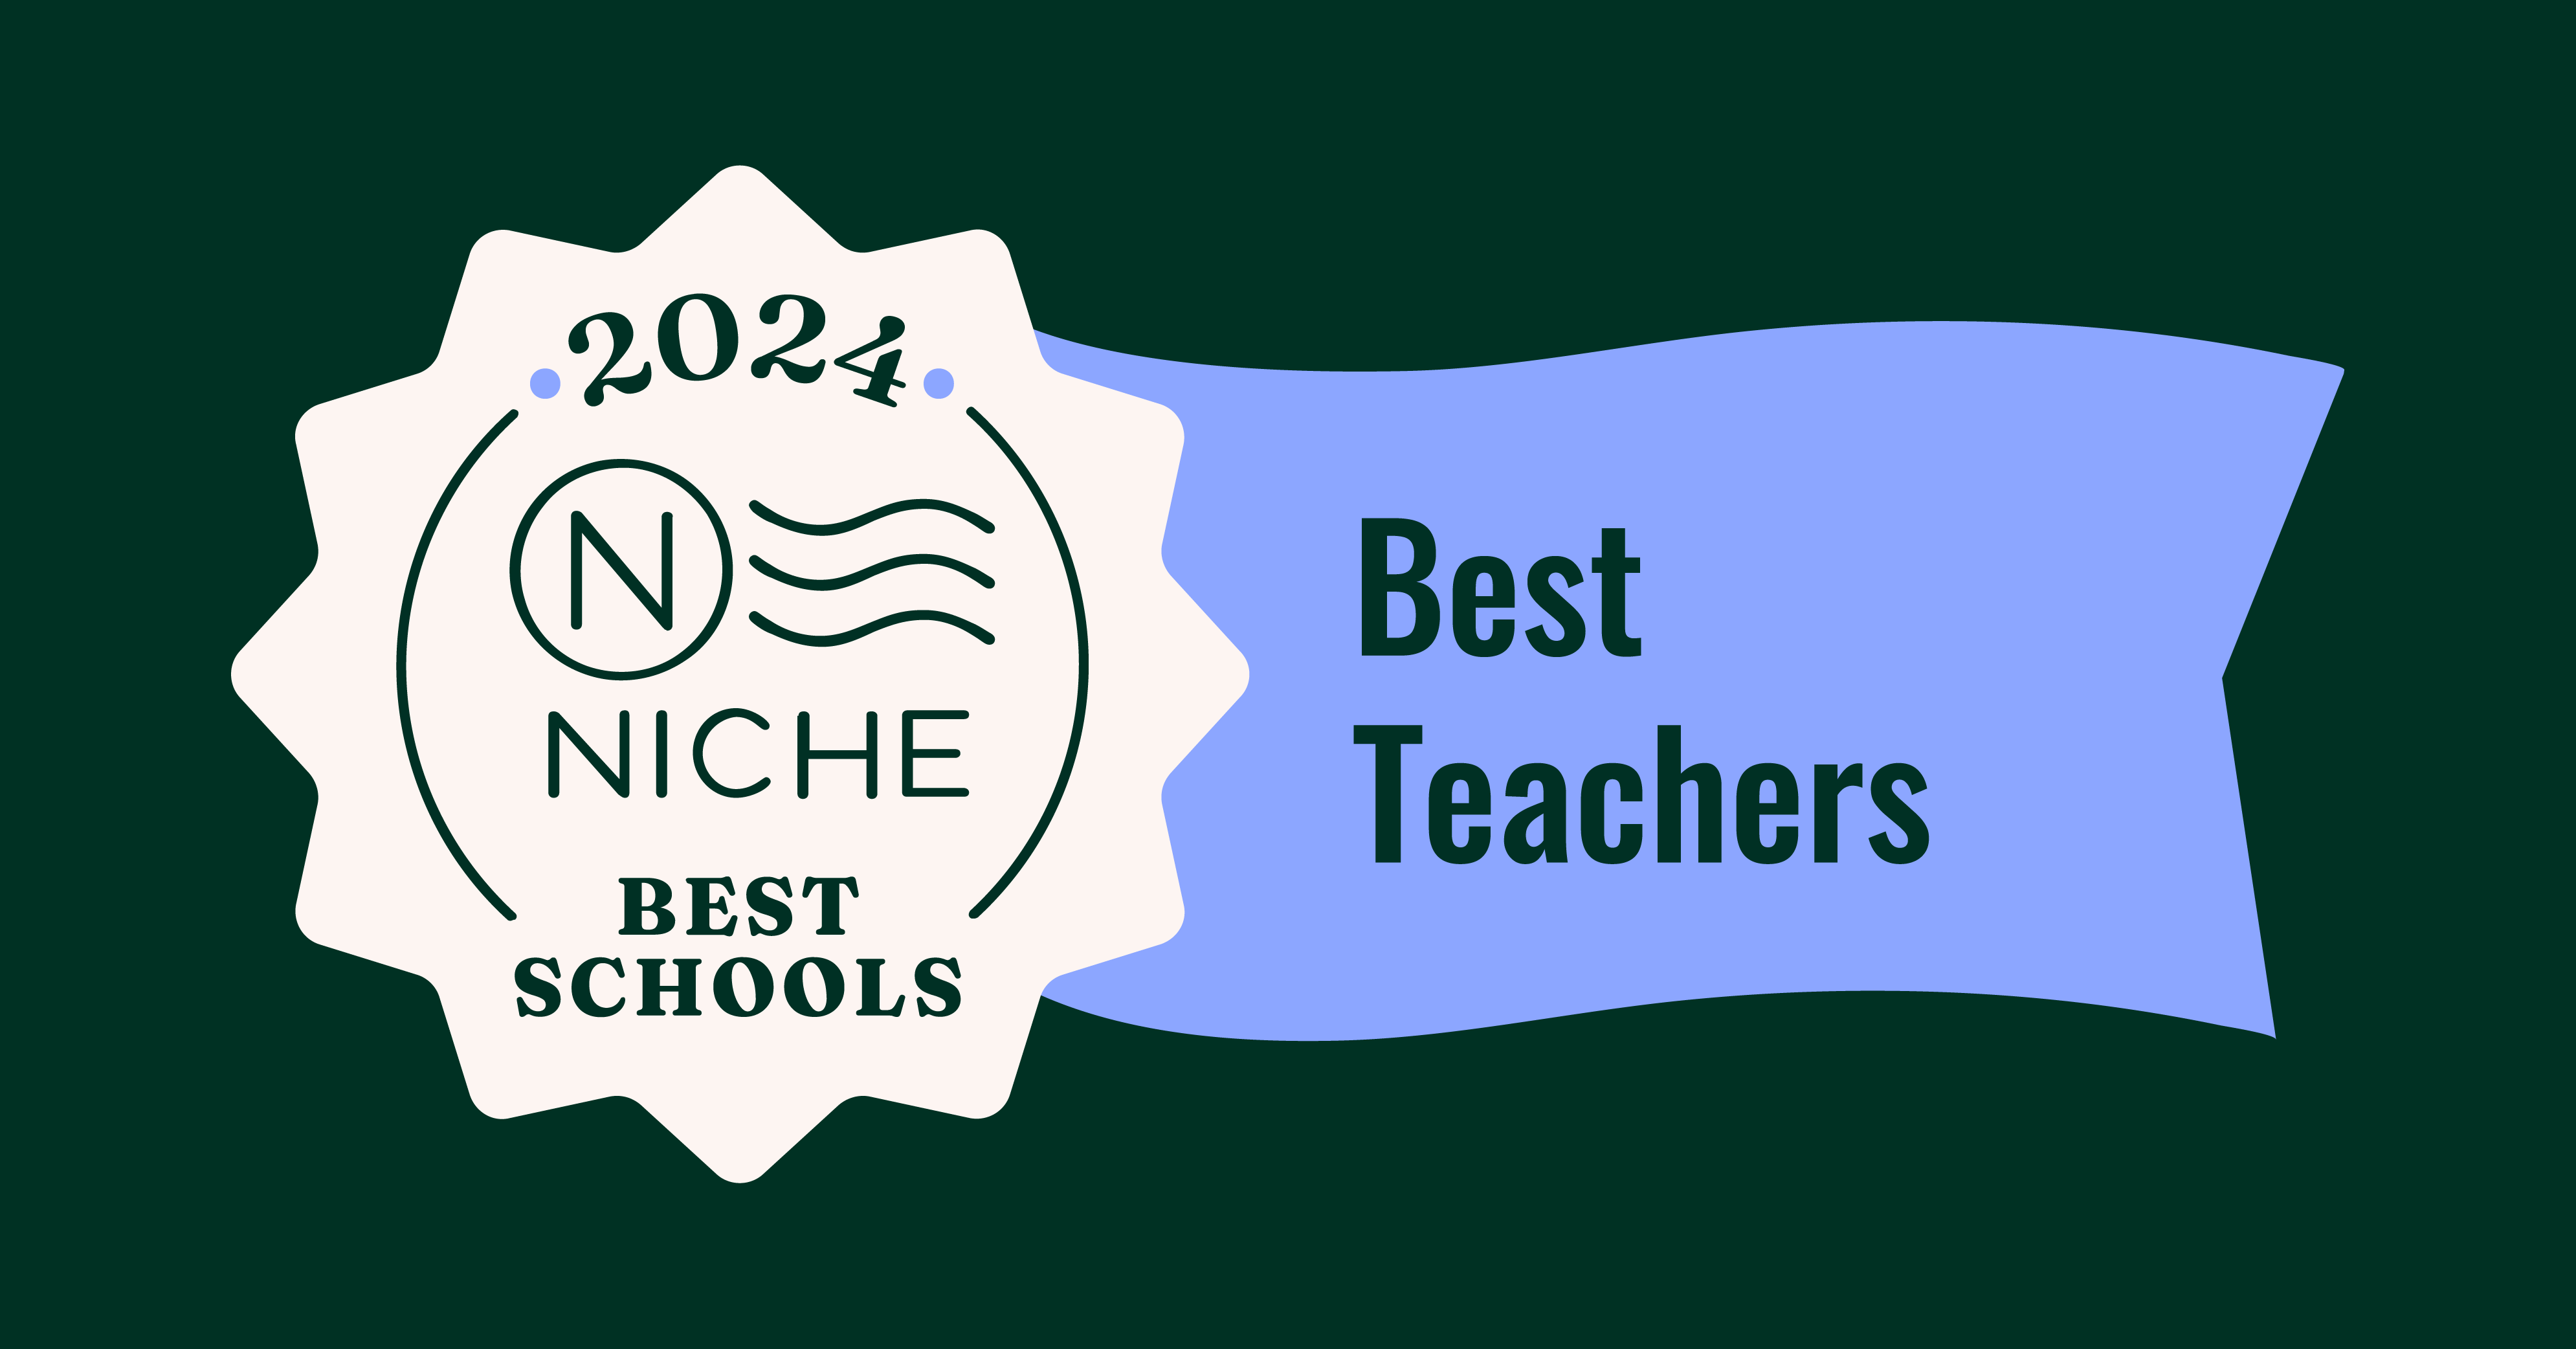 Amazing teachers, amazing results! City High just ranked #6 Best Charter High School in Pennsylvania by niche.com.